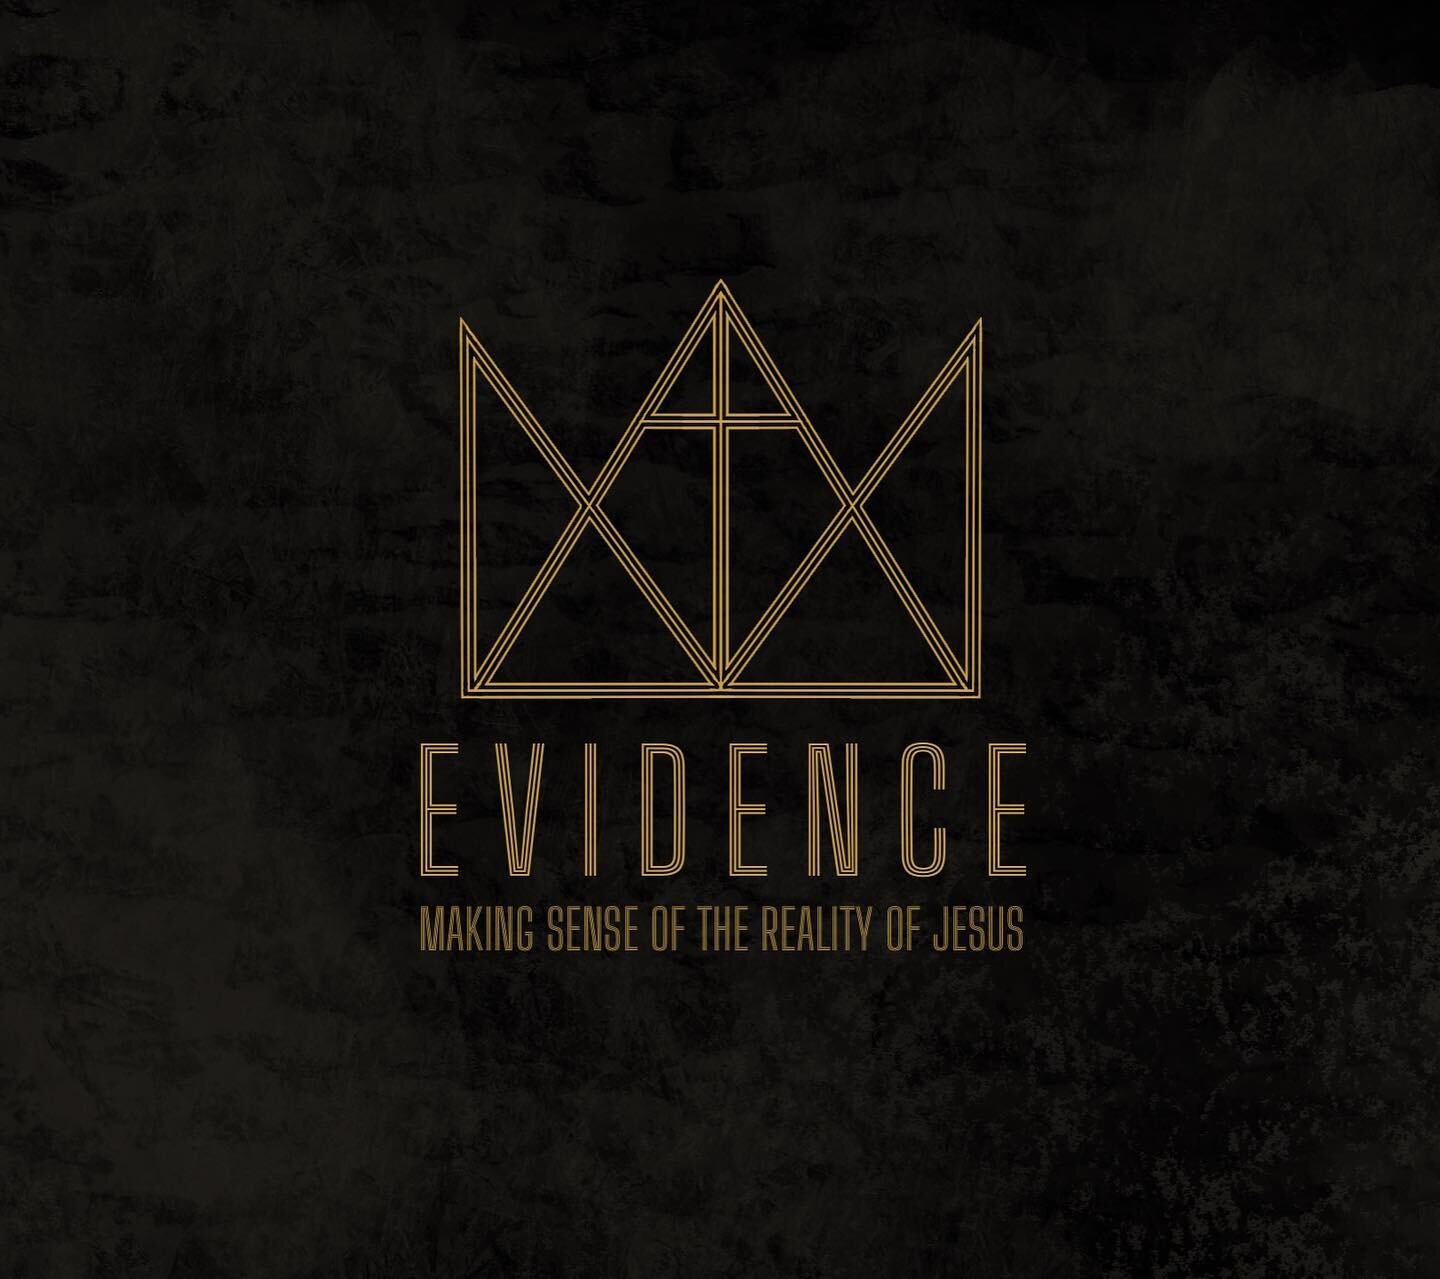 Join us tonight as we kick off our new series EVIDENCE! Leading up to Easter we are exploring evidence for the resurrection of Jesus, and looking at how the resurrection is essential to the Christian faith!